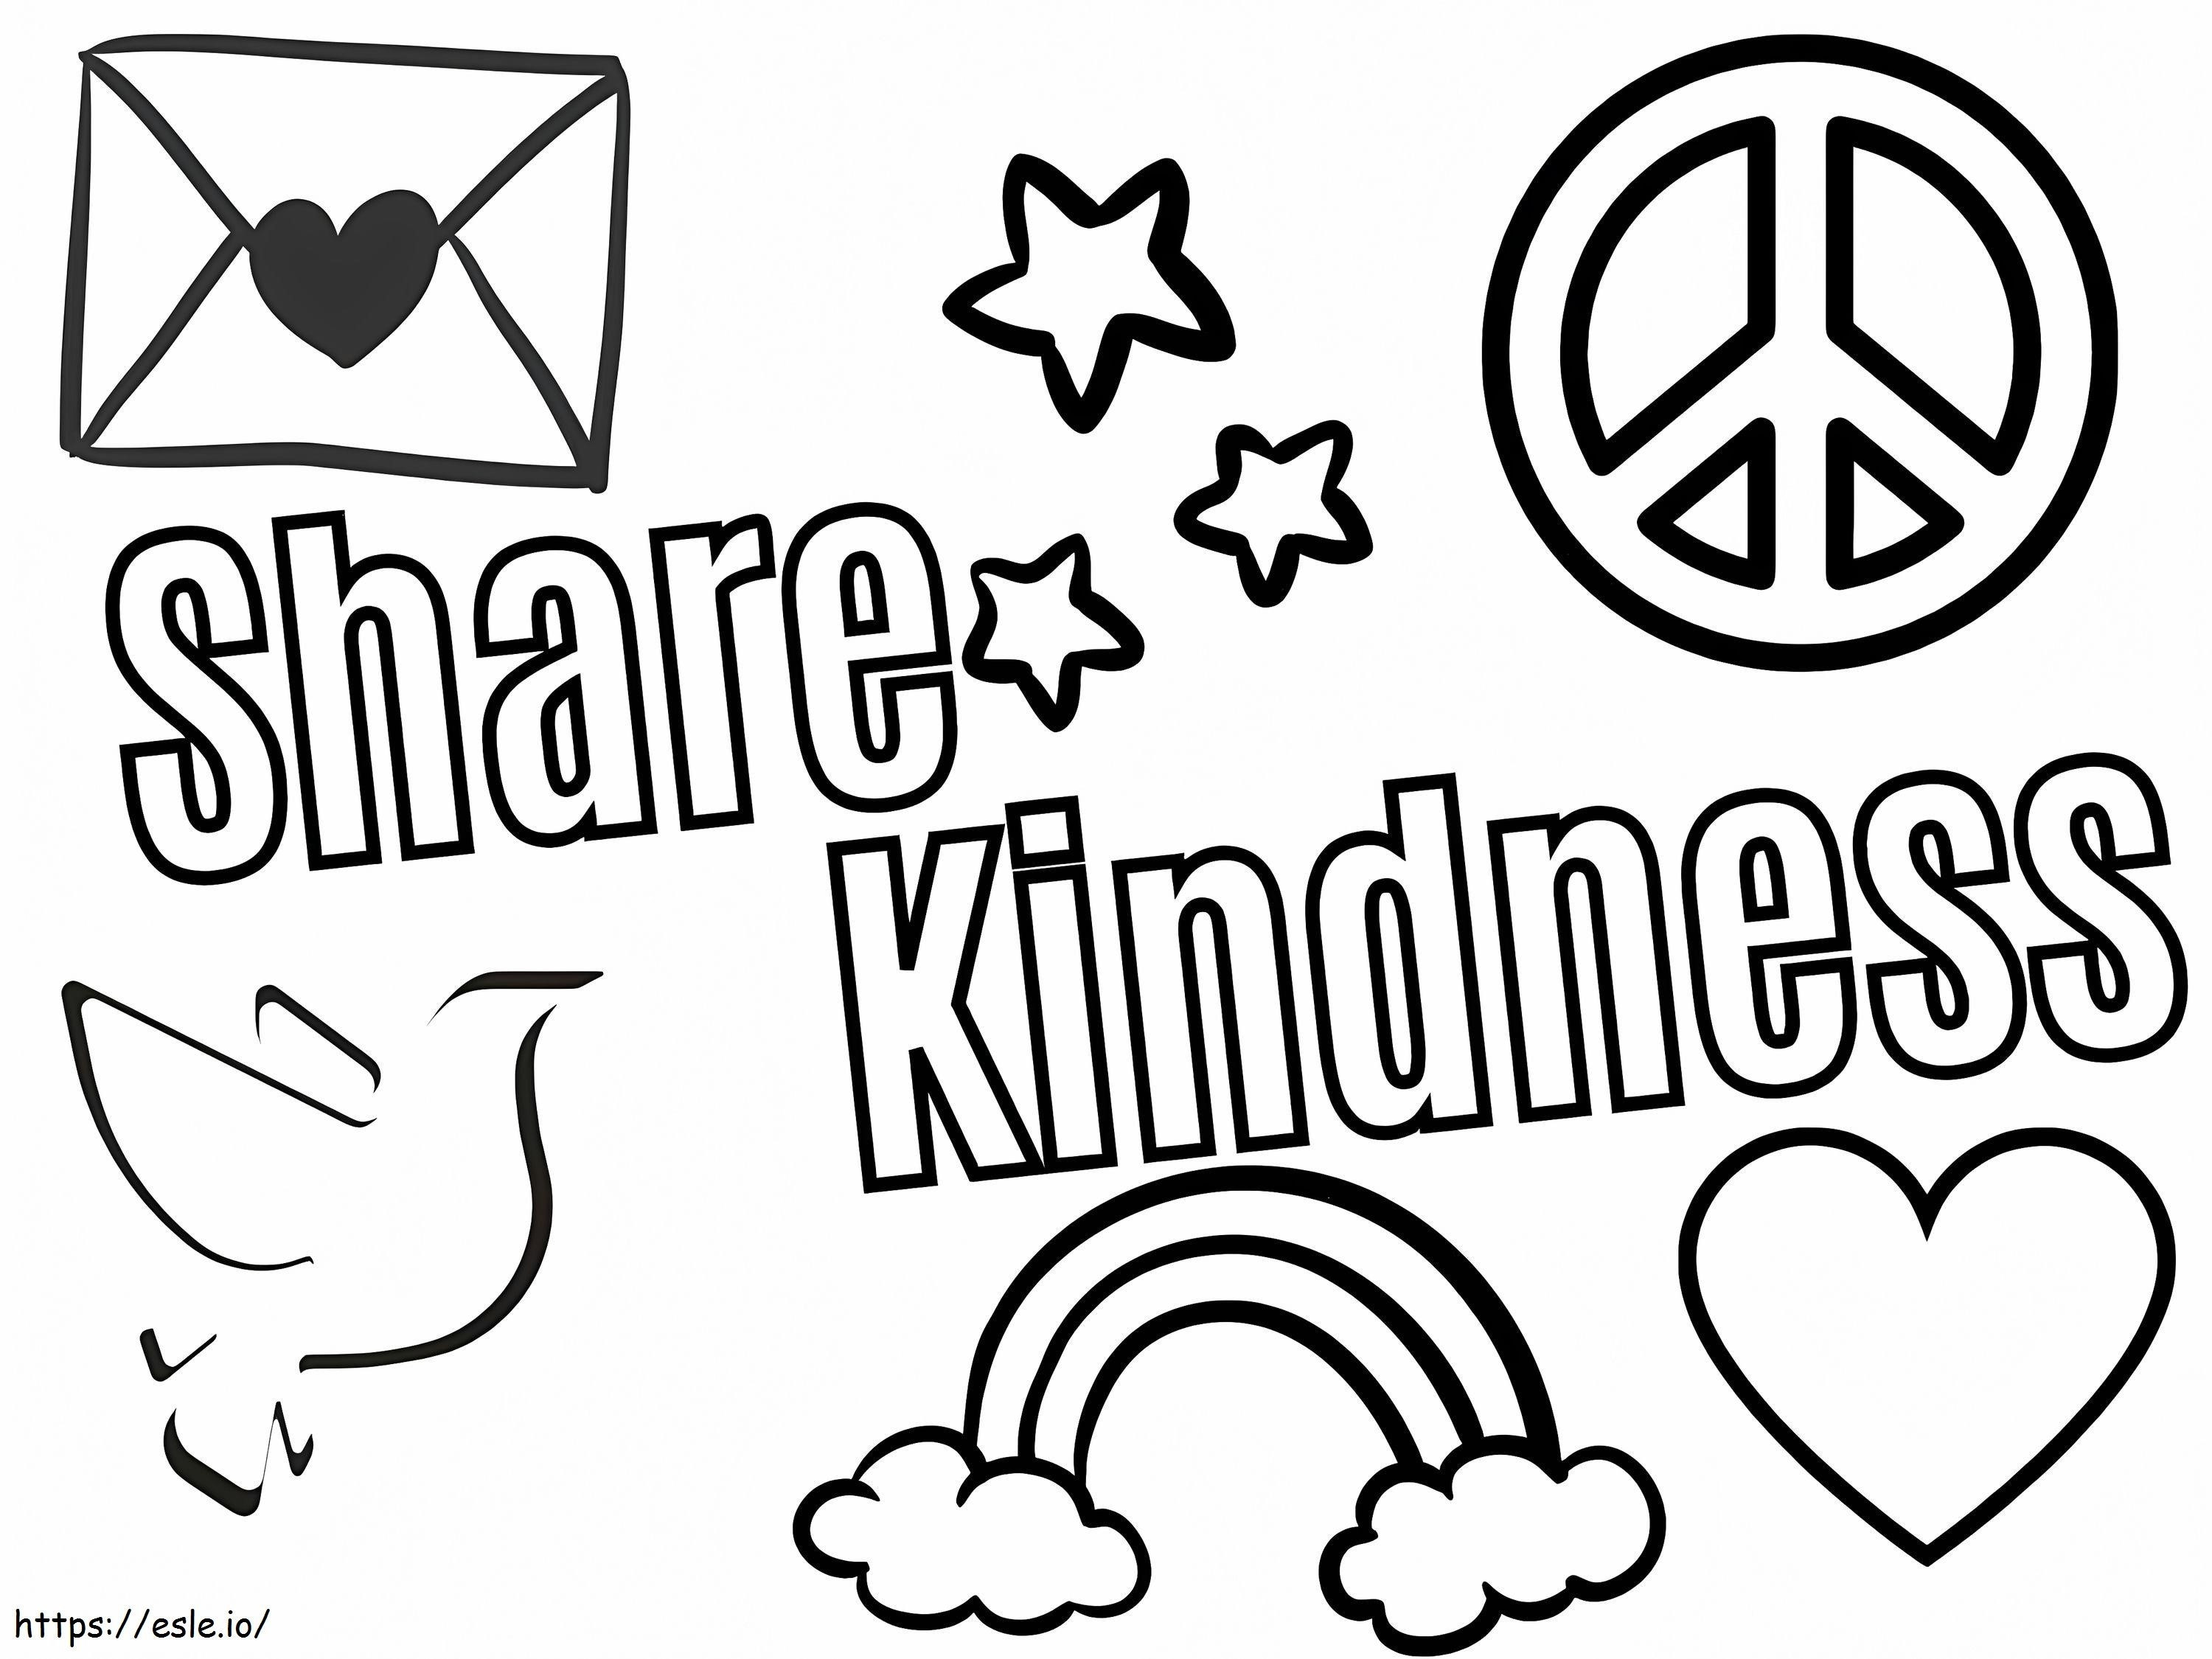 Share Kindness coloring page